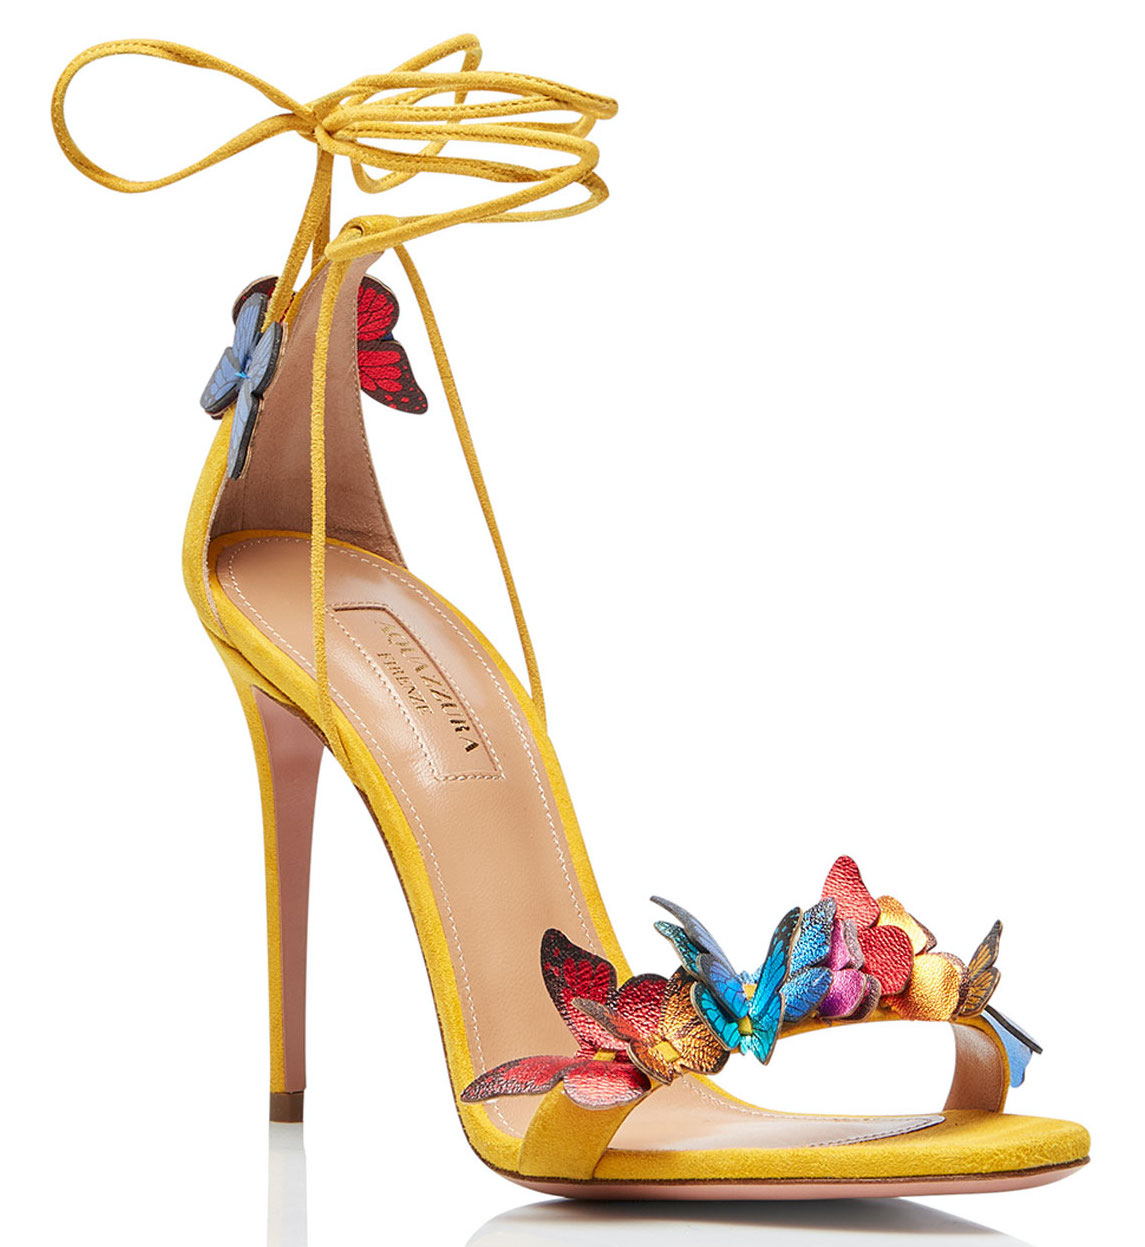 Yellow heels with red, blue and yellow butterflies on the toe strap and heels. Available at Neiman Marcus.